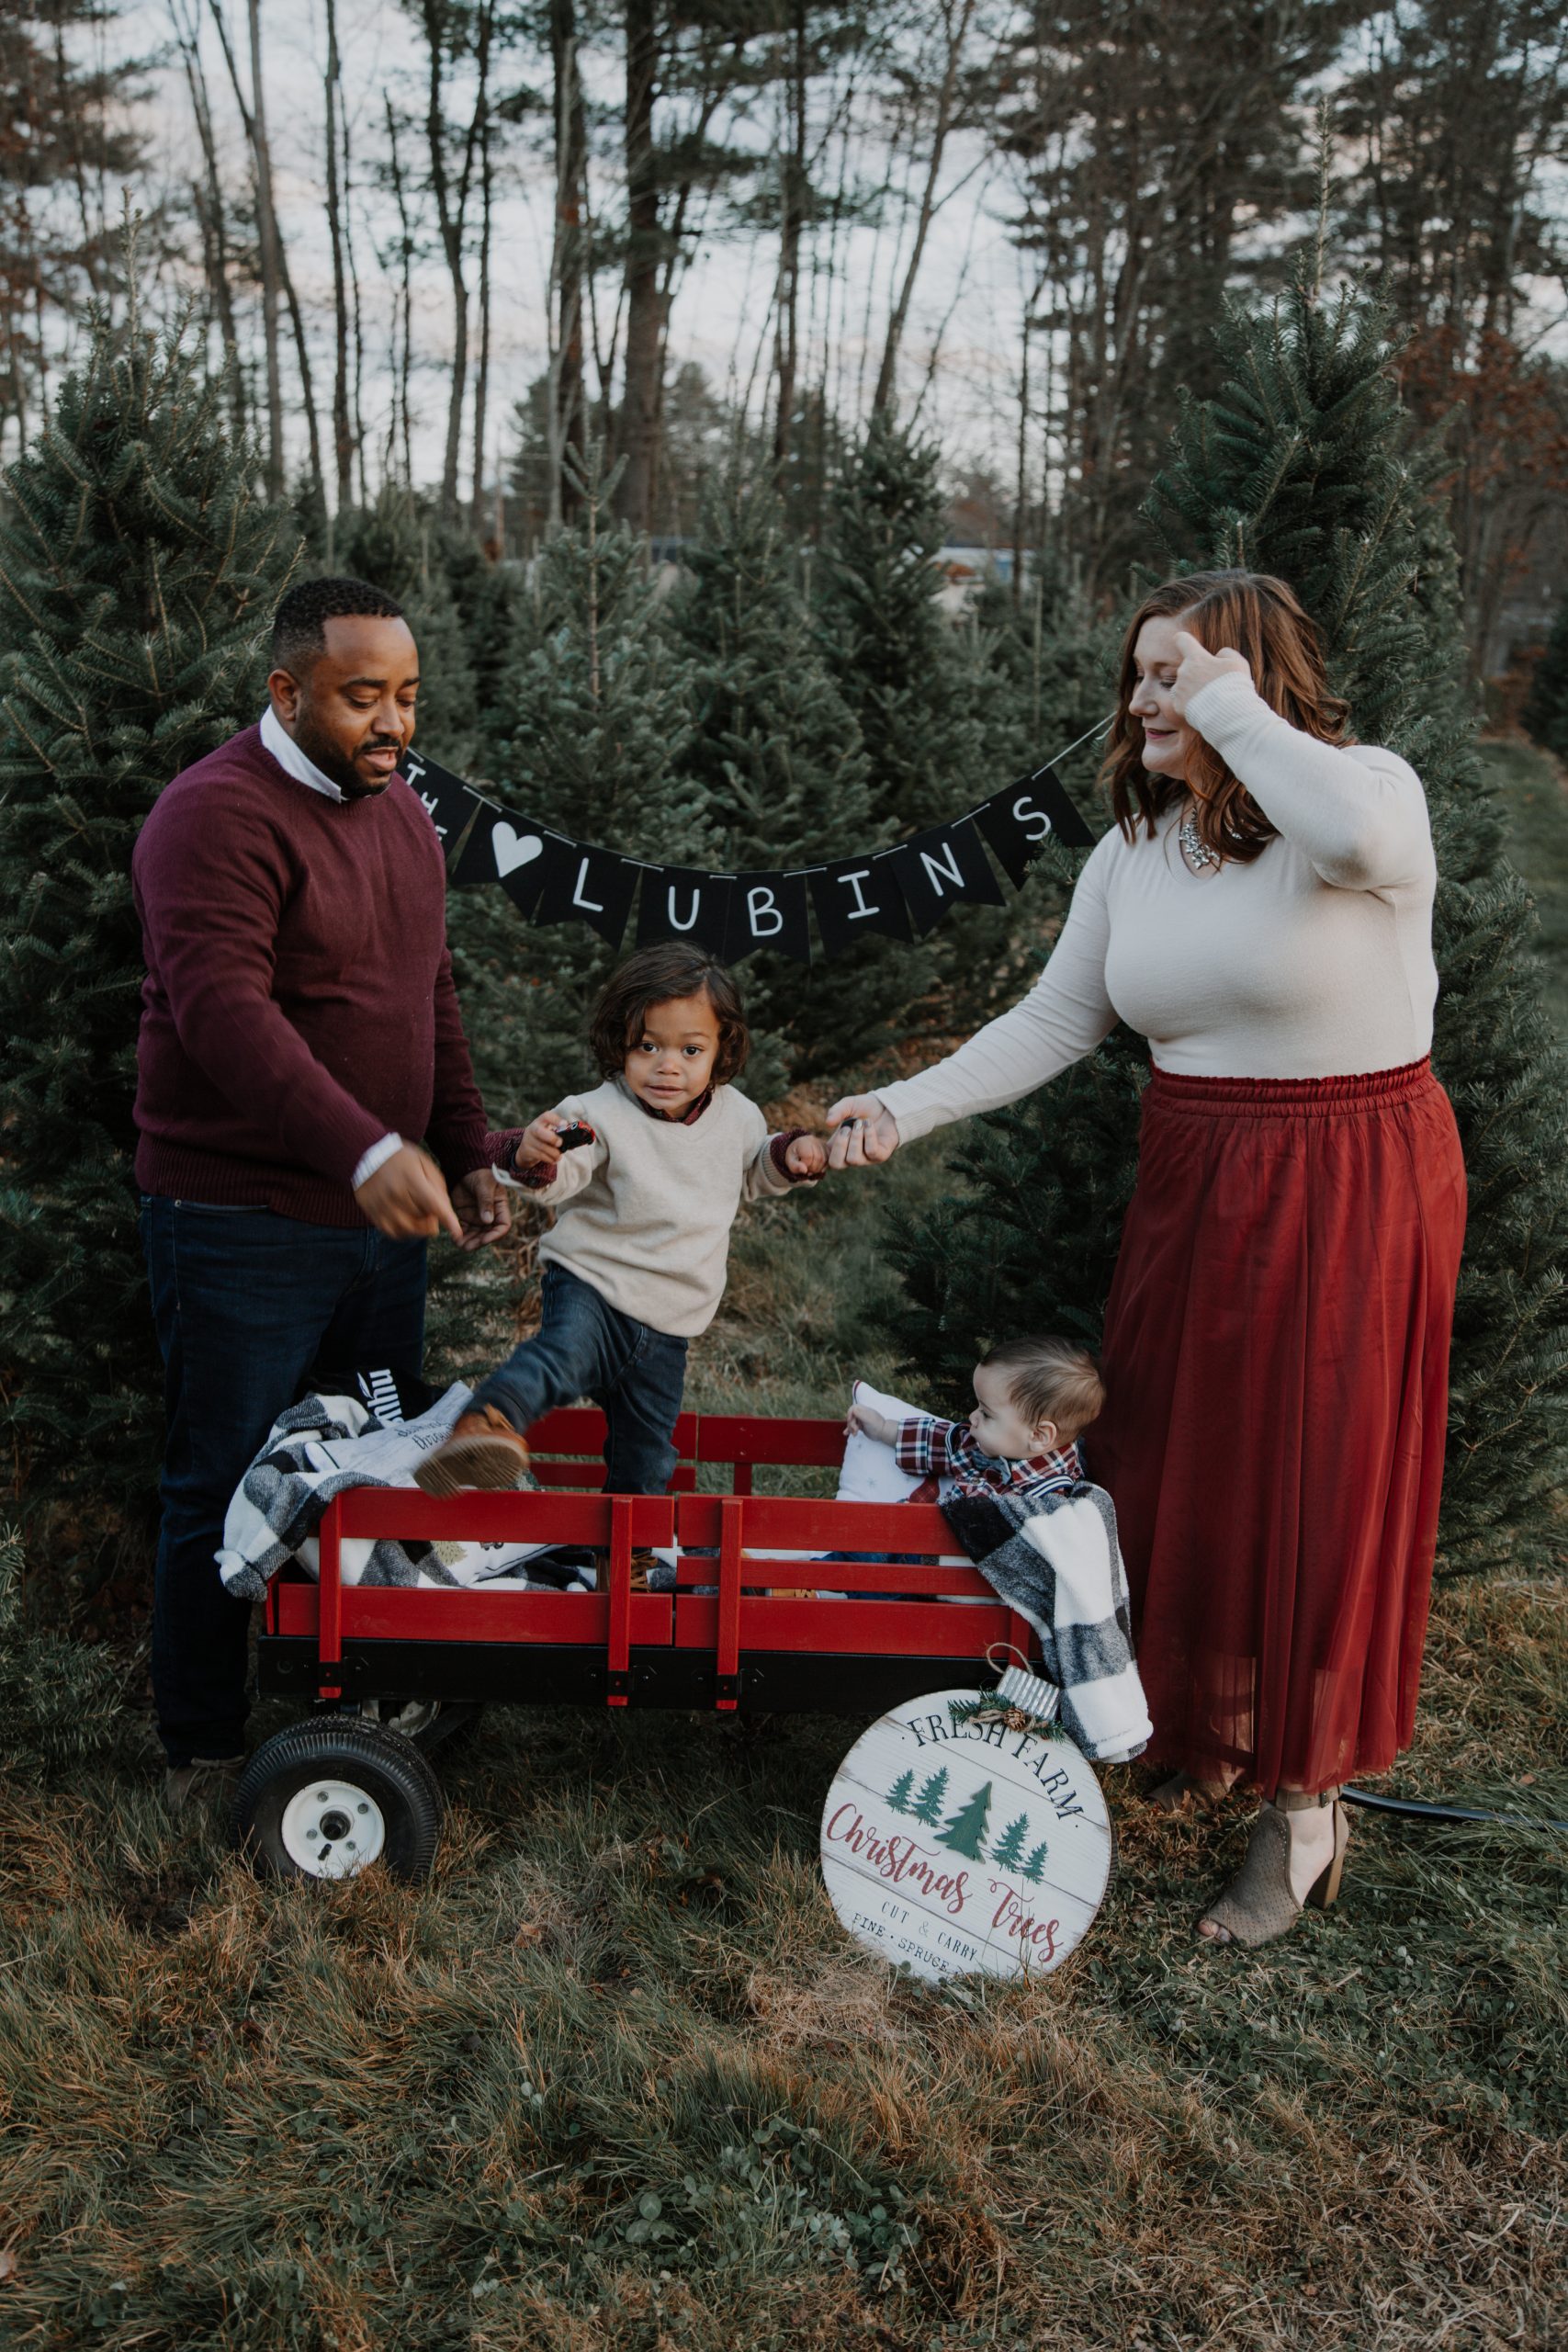 Family photo for holiday cards including mom and dad trying to wrangle two toddlers climbing out of a wagon